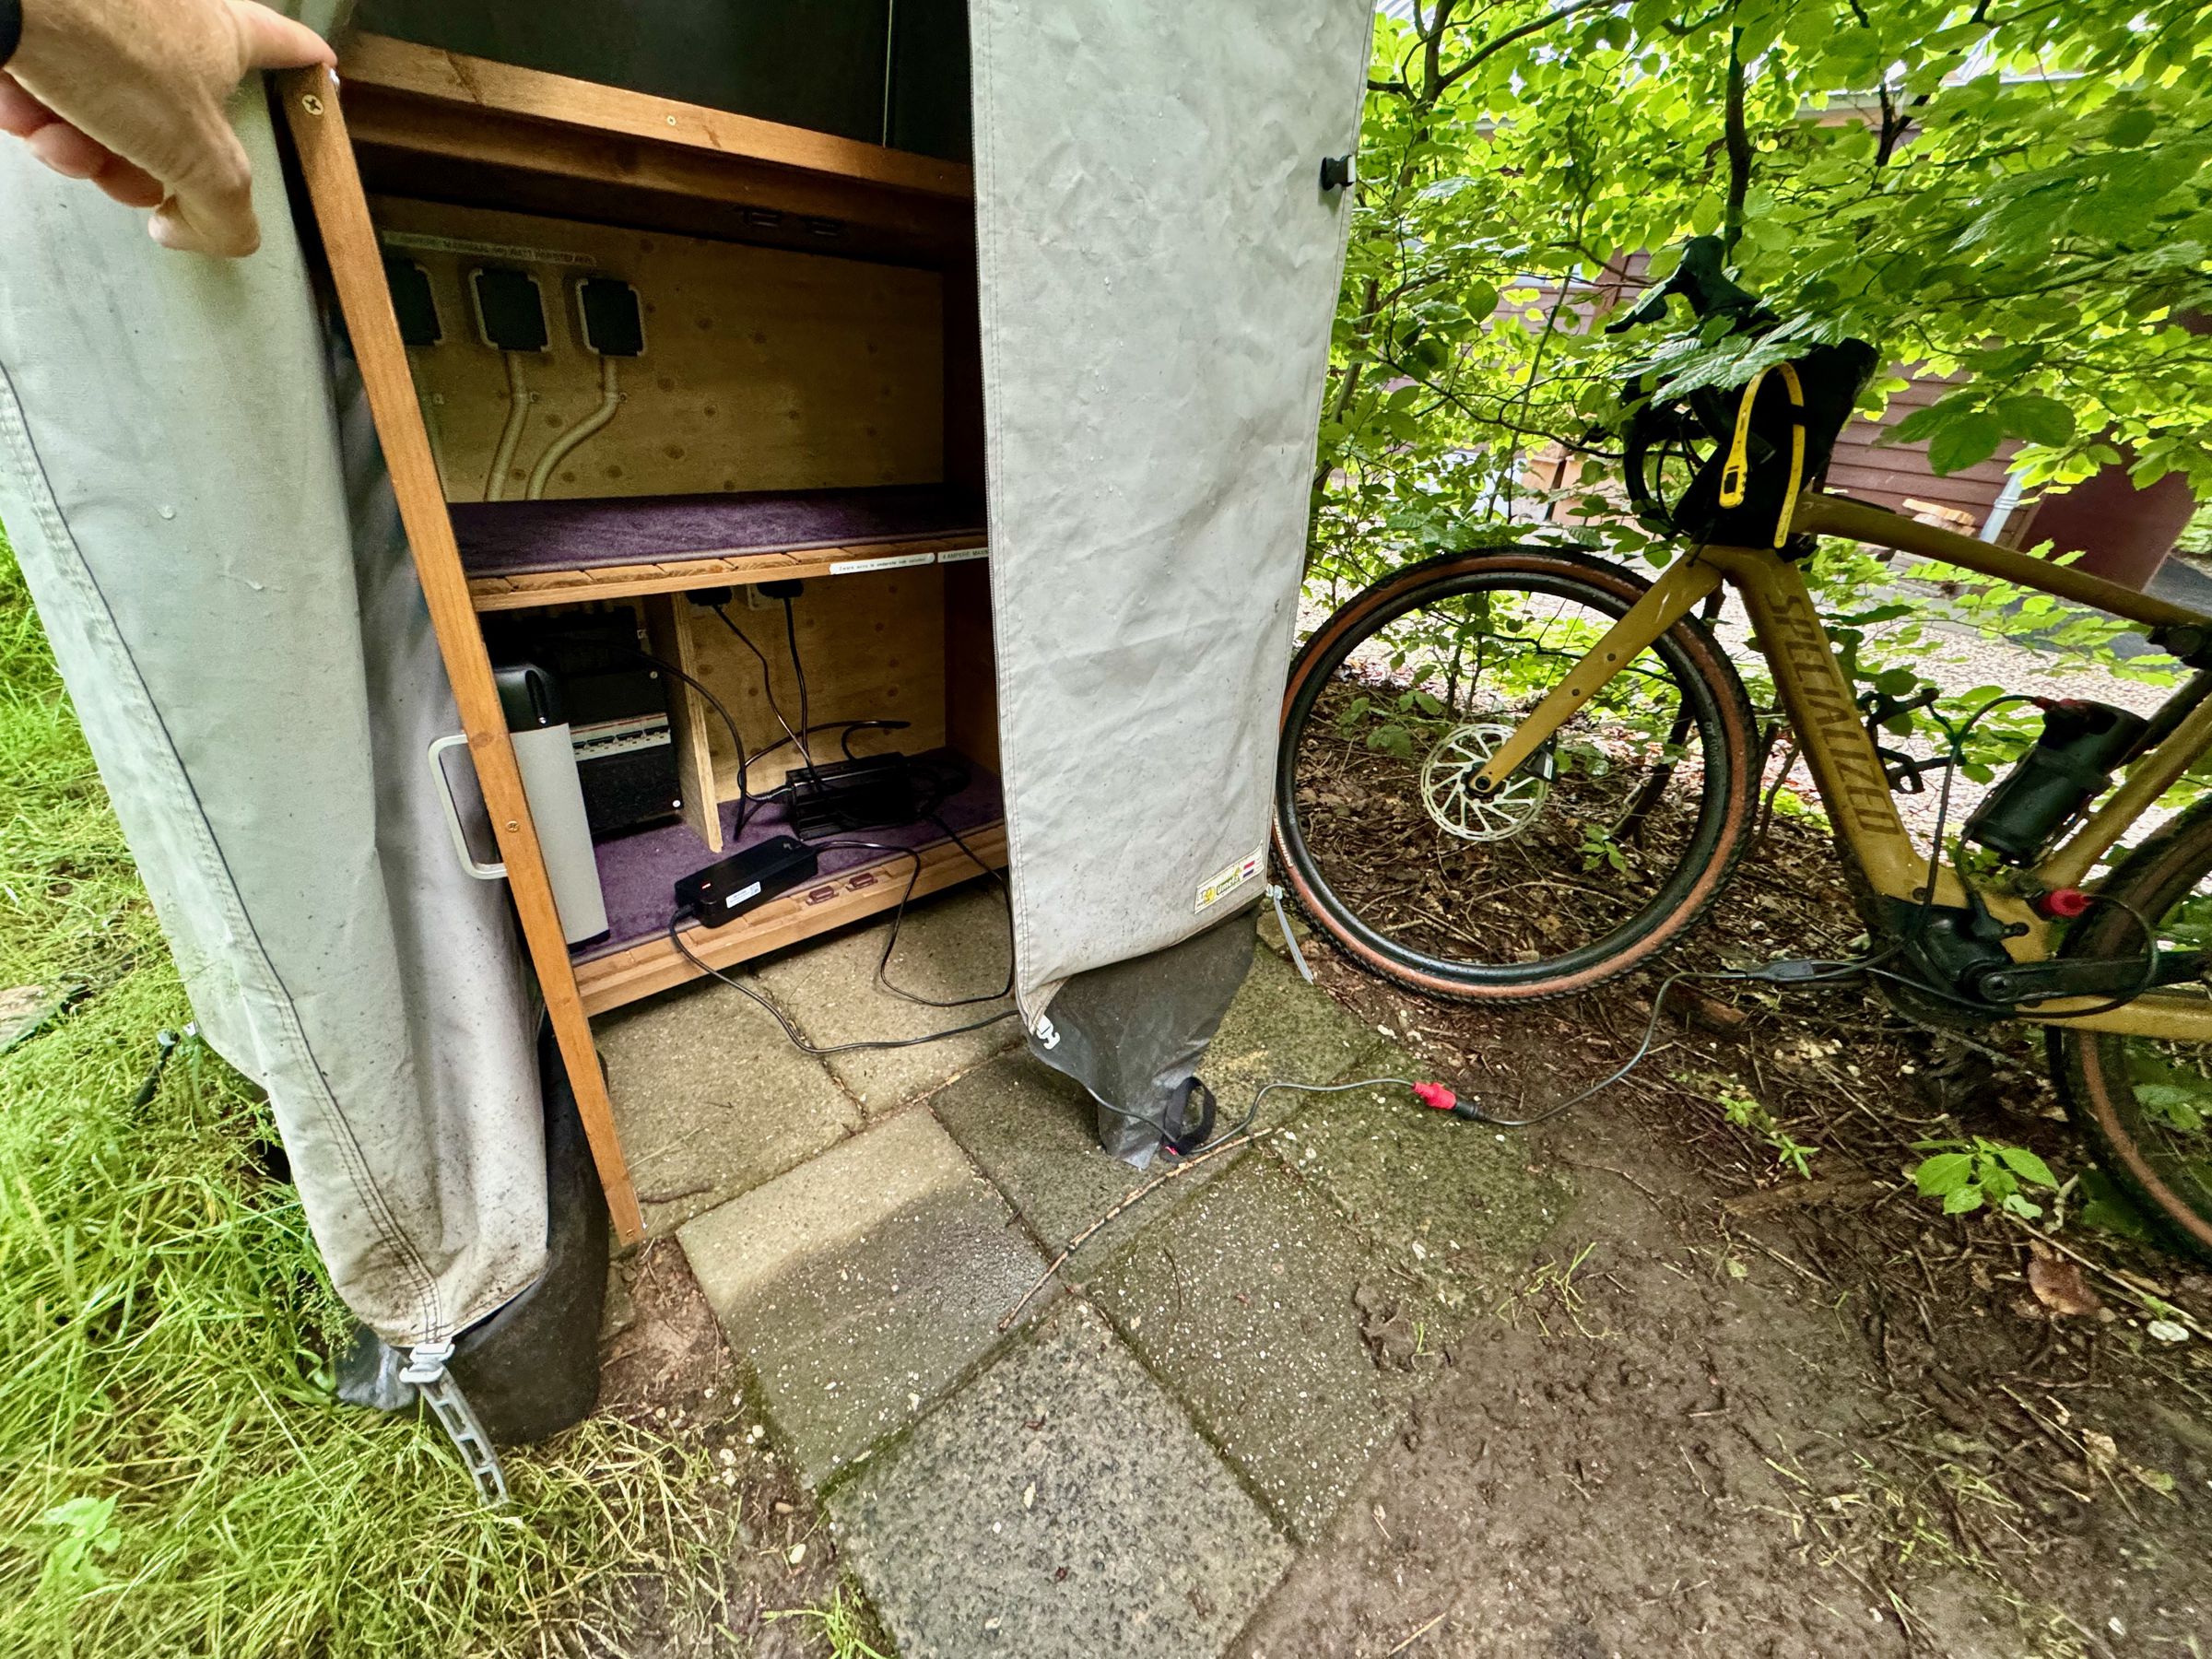 <em>This campsite offered this solar tent to charge e-bike batteries, assuming they’re removable. The main battery in the Specialized Turbo Creo 2 Comp is integrated, however, so I had to leave it here — about 200 meters from my tent — charging with the Y-cable overnight and in the rain, with nothing but a small lock, trash bag, and luck to protect it.</em>